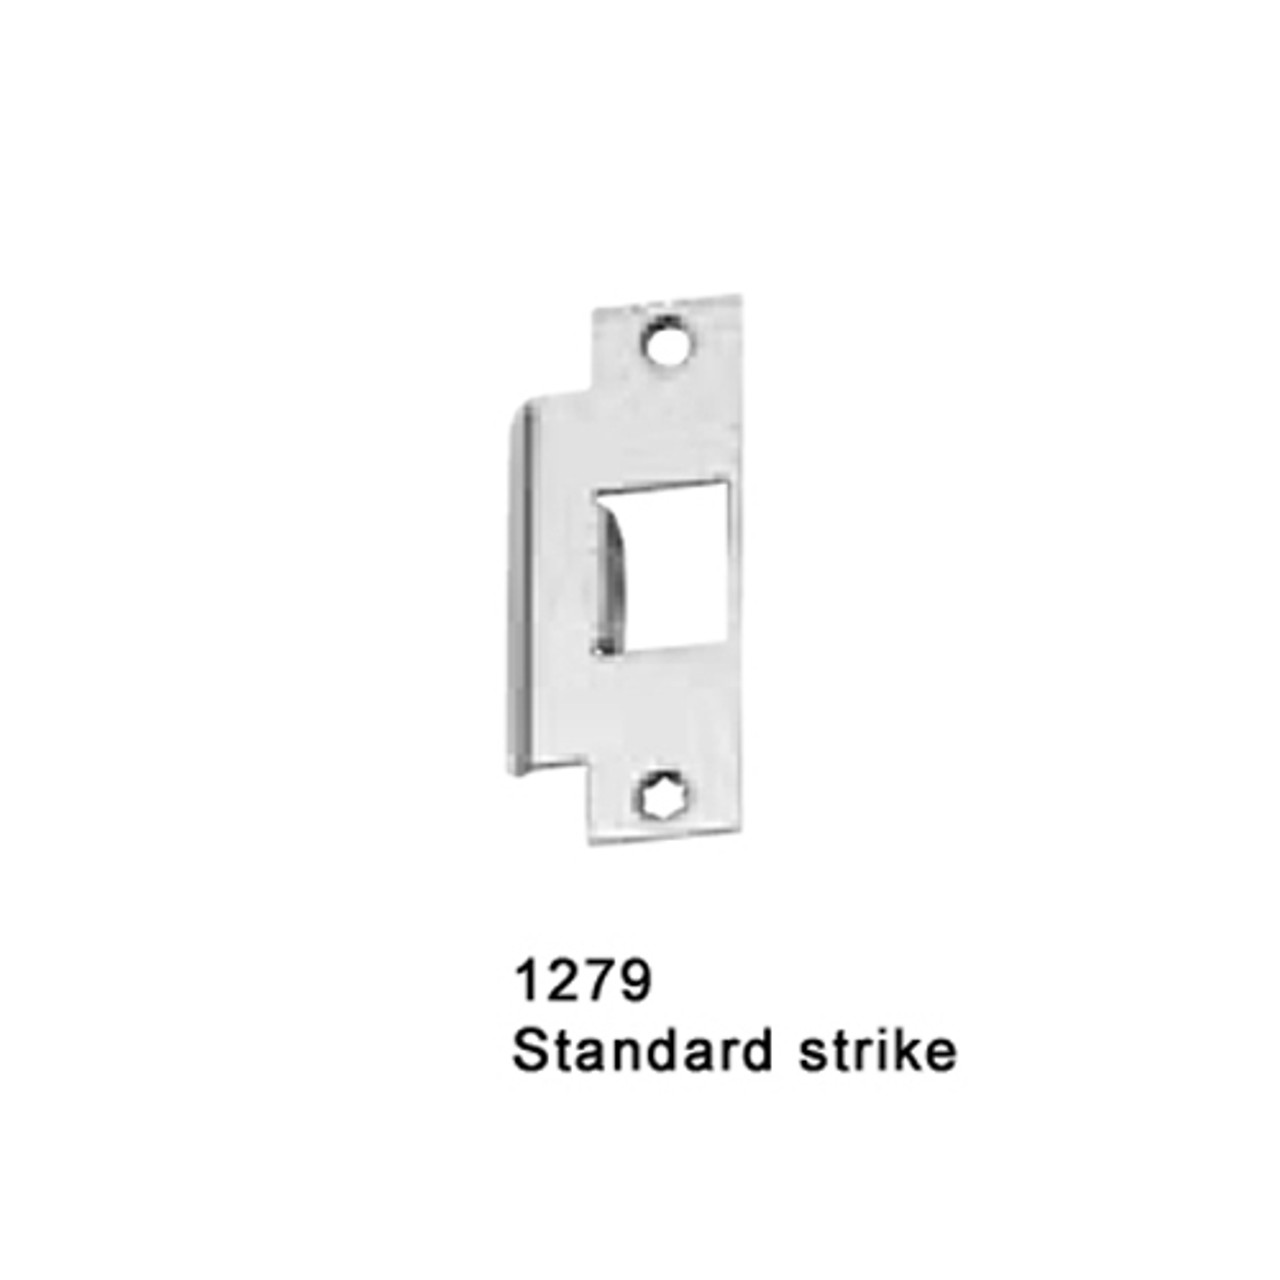 CD25-M-TP-BE-US28-3-RHR Falcon 25 Series Mortise Lock Devices 512TP-BE Thumbpiece Trim with Blank Escutcheon in Anodized Aluminum